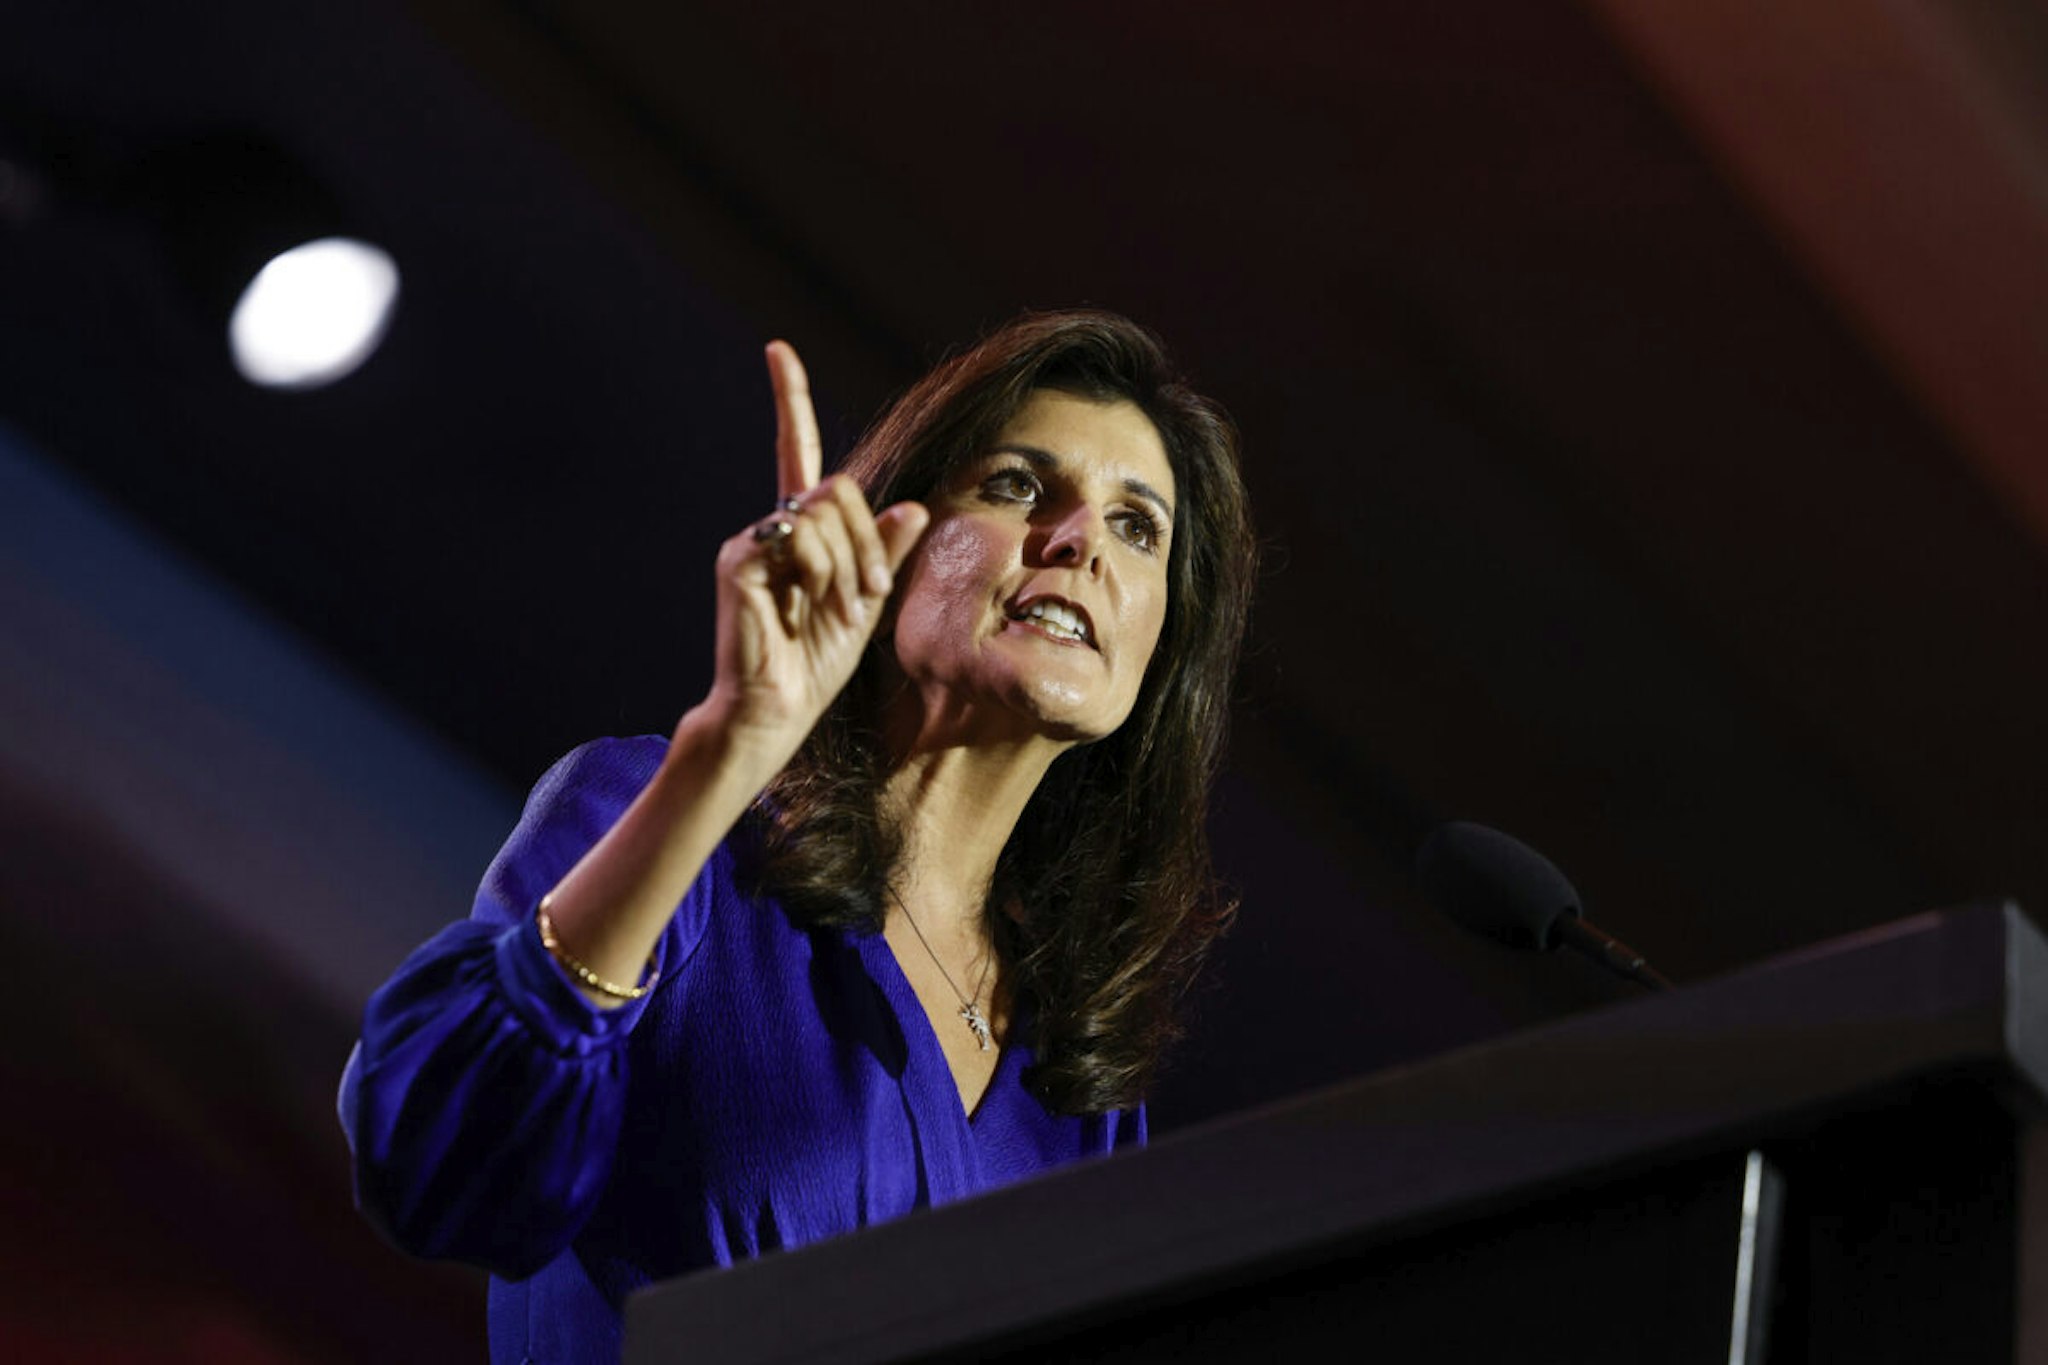 ARLINGTON, VIRGINIA - JULY 17: Republican presidential candidate Nikki Haley delivers remarks at the Christians United for Israel (CUFI) summit on July 17, 2023 in Arlington, Virginia. The former U.N. ambassador and other 2024 GOP hopefuls are making their cases before the pro-Israeli group.